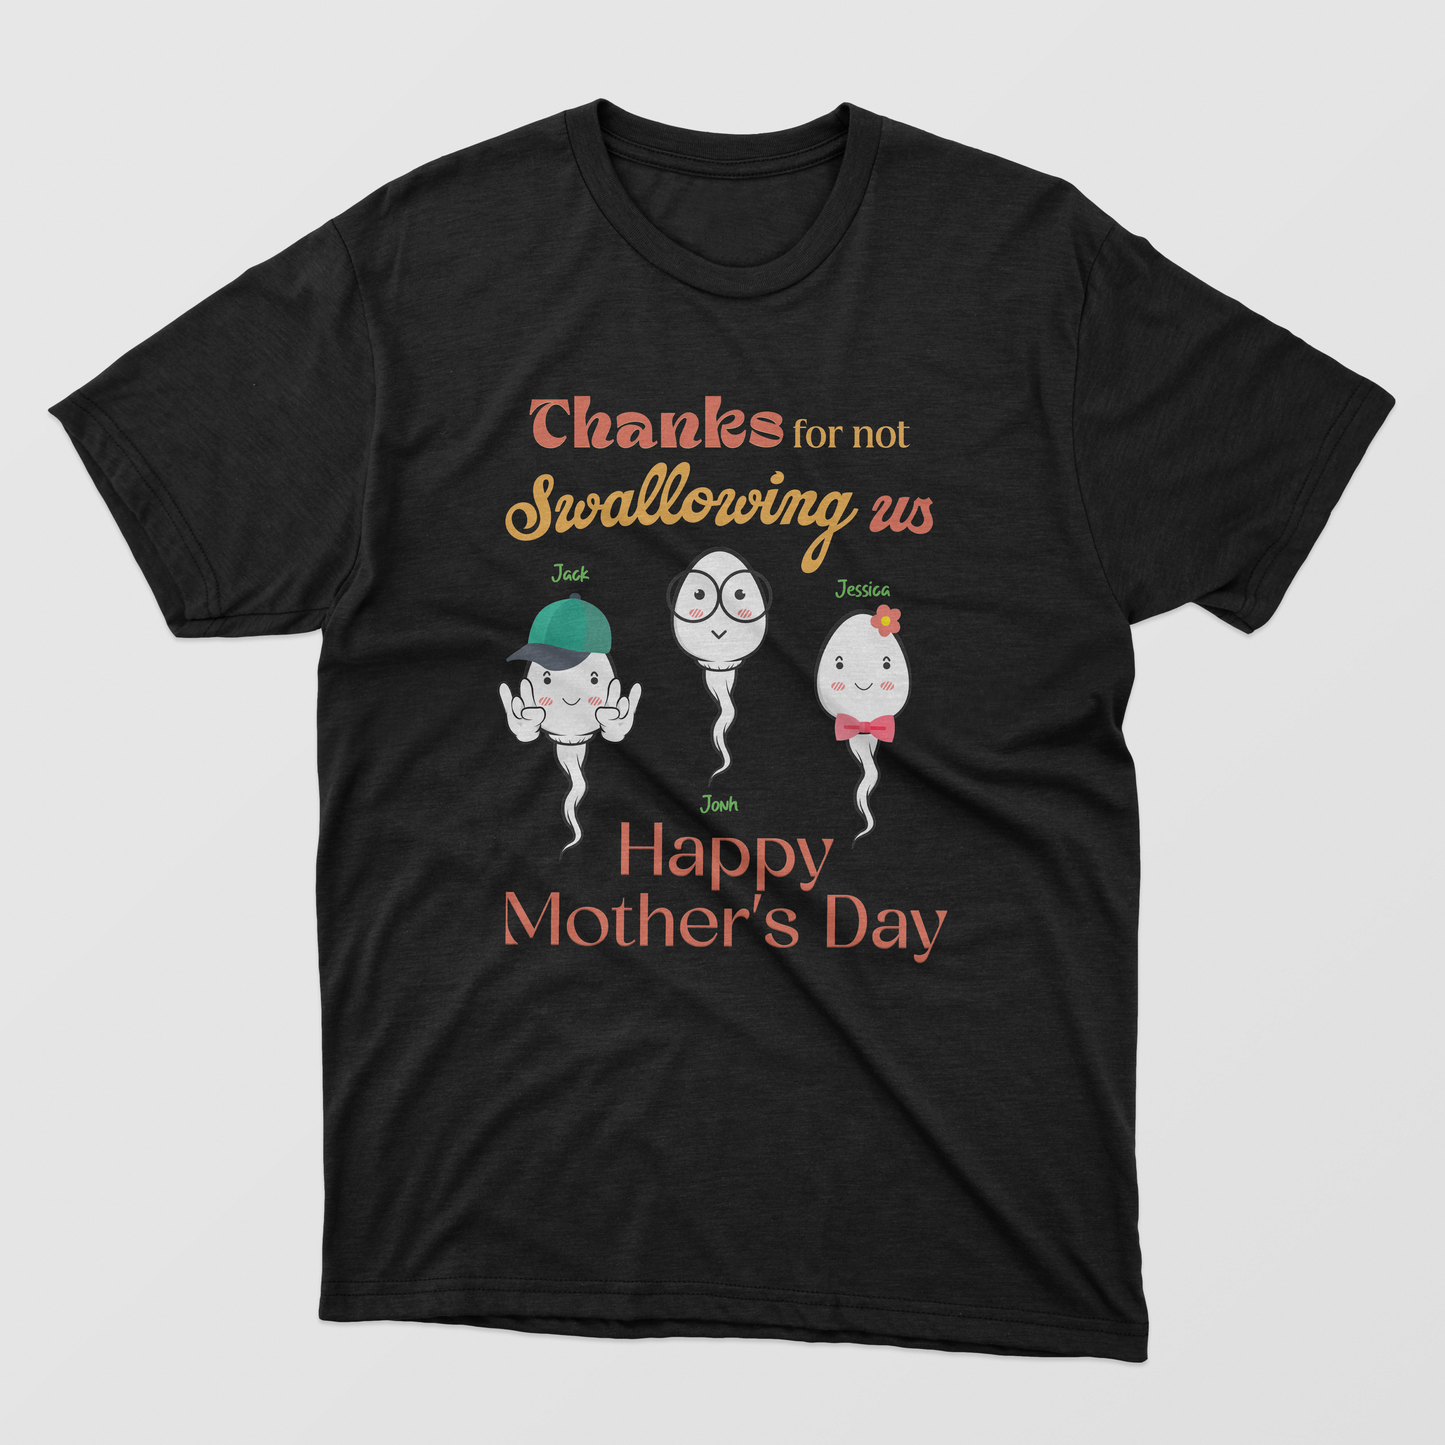 Customized Mother's Day Shirt, Personalized Thank You For Everything From The Ones You Didn't Swallow Shirt For Mom